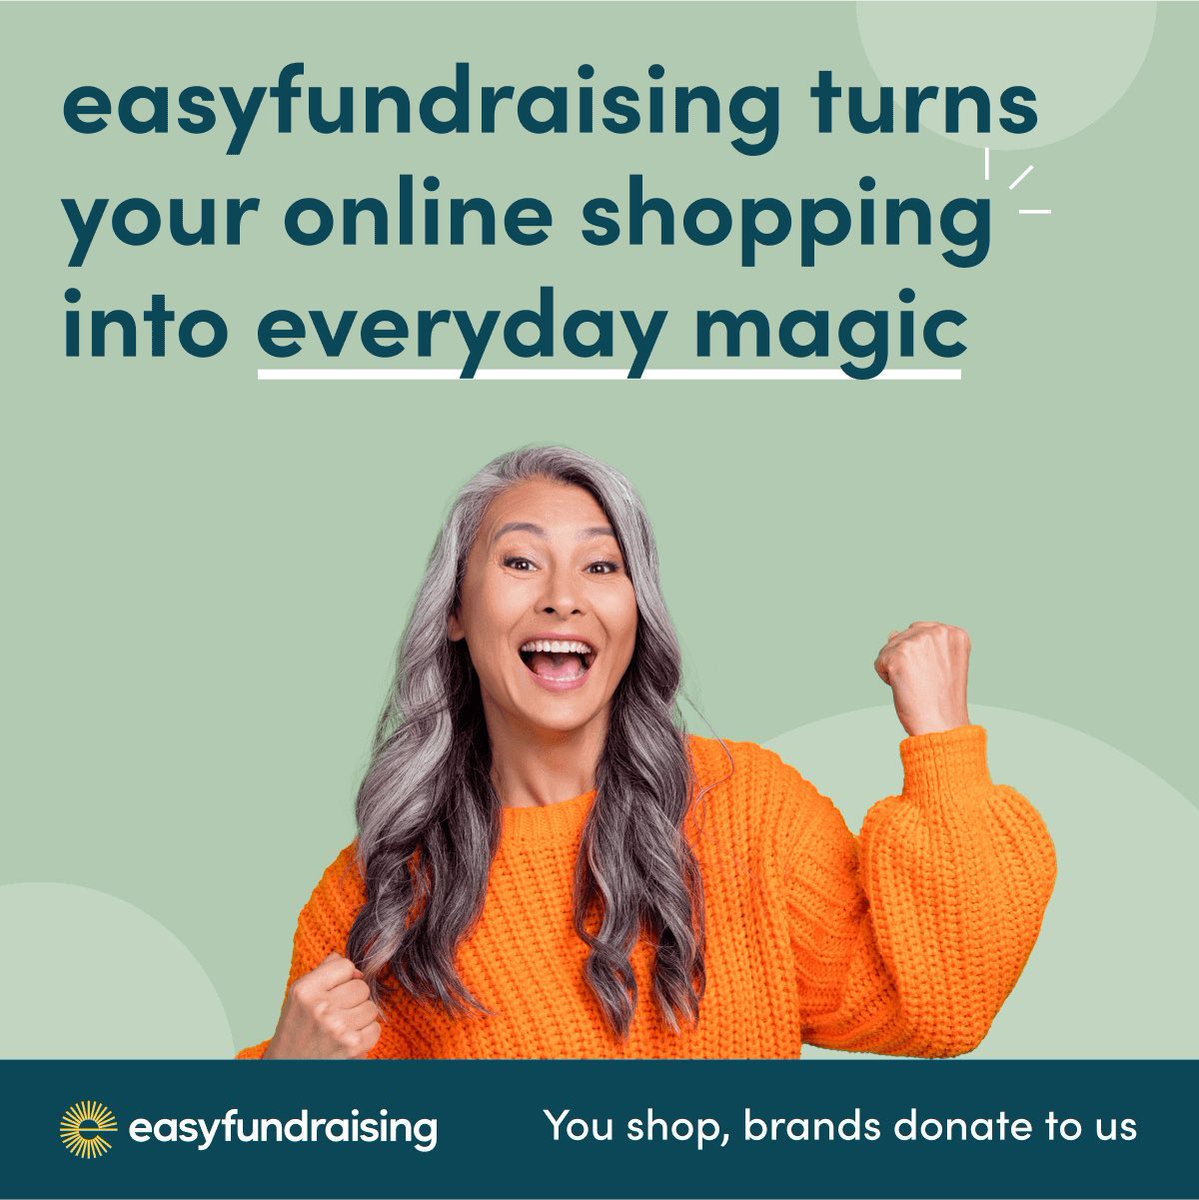 Amazing news, this #DonationDay Wye Gymnastics has received £46.53 from EasyFundraising! 

Thank you to everyone who supports us - you're incredible! 

Want to get involved? Sign up for free and turn your online shopping into free donations for WGGC: 

easyfundraising.org.uk/causes/wyegymn…